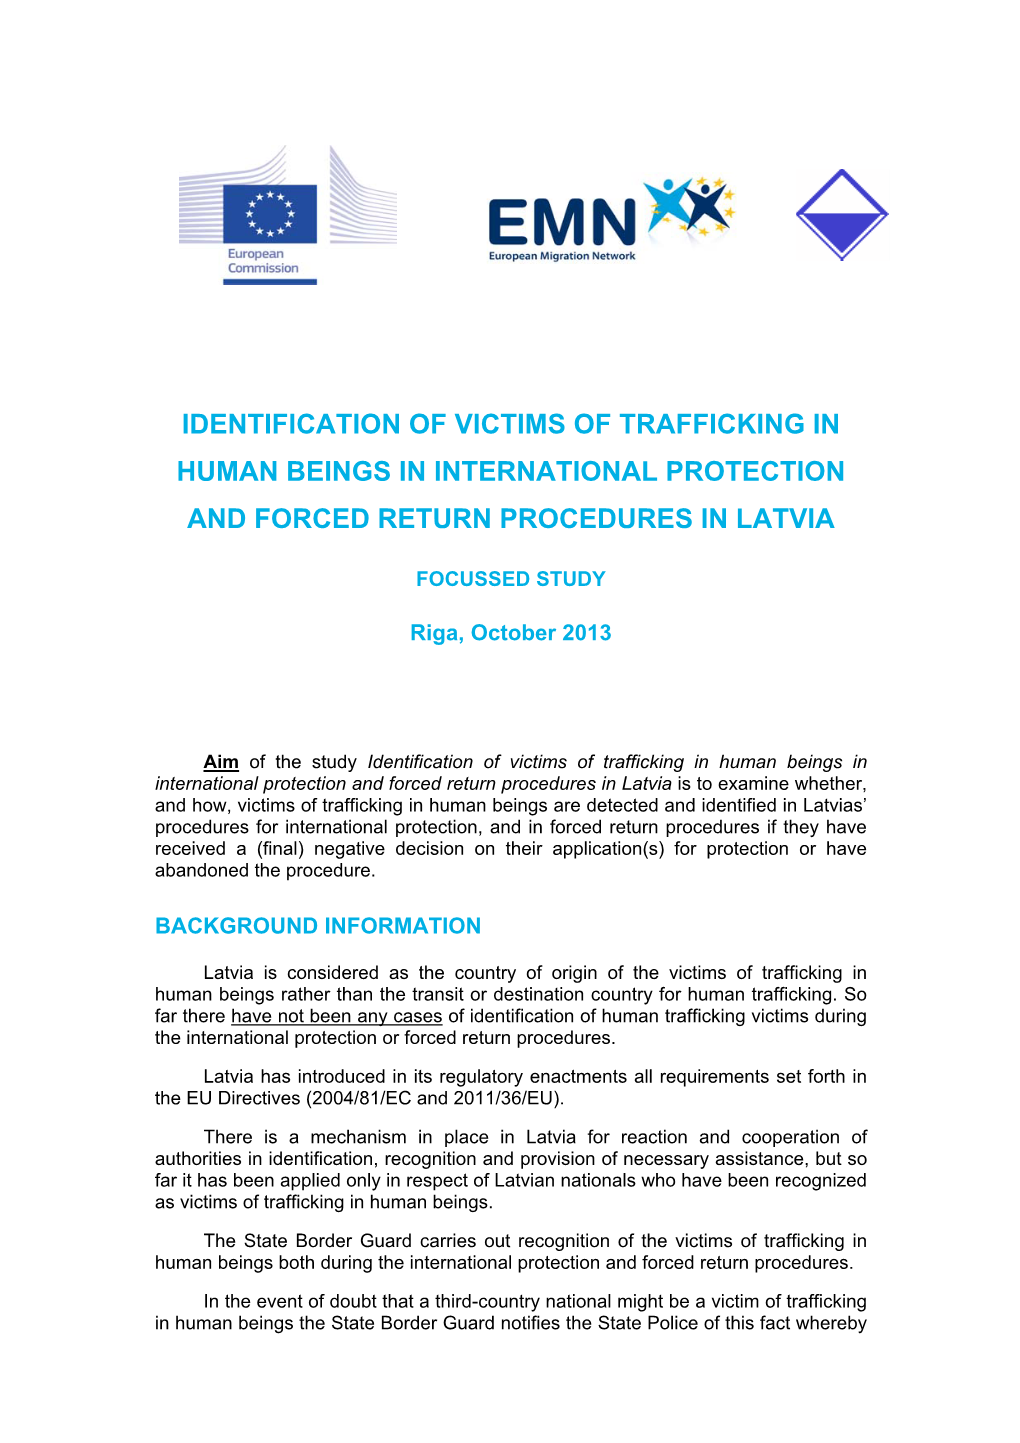 Identification of Victims of Trafficking in Human Beings in International Protection and Forced Return Procedures in Latvia